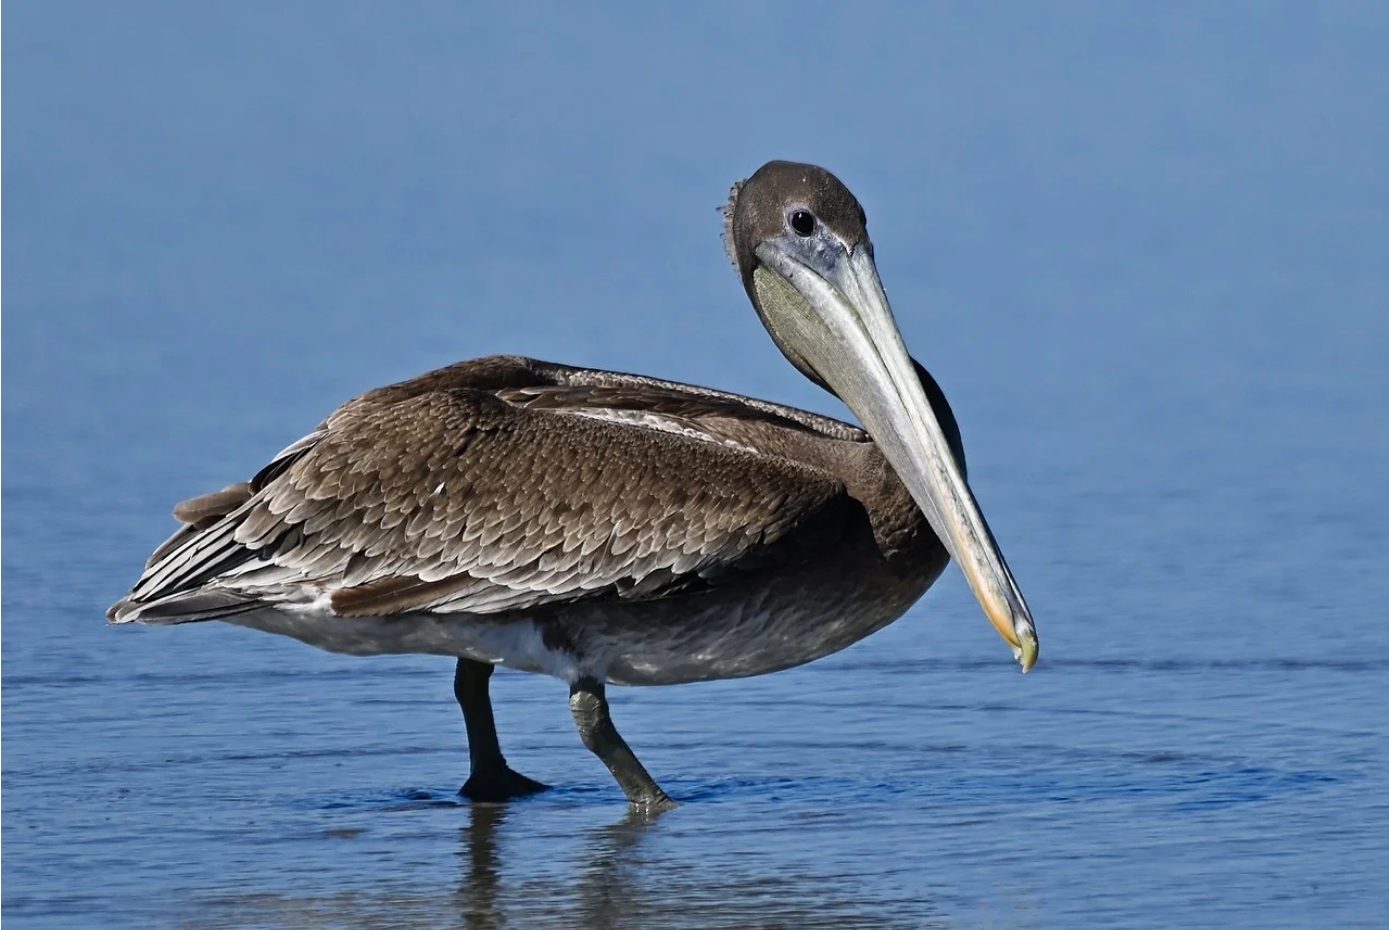 Image for display with article titled How to Save a Pelican